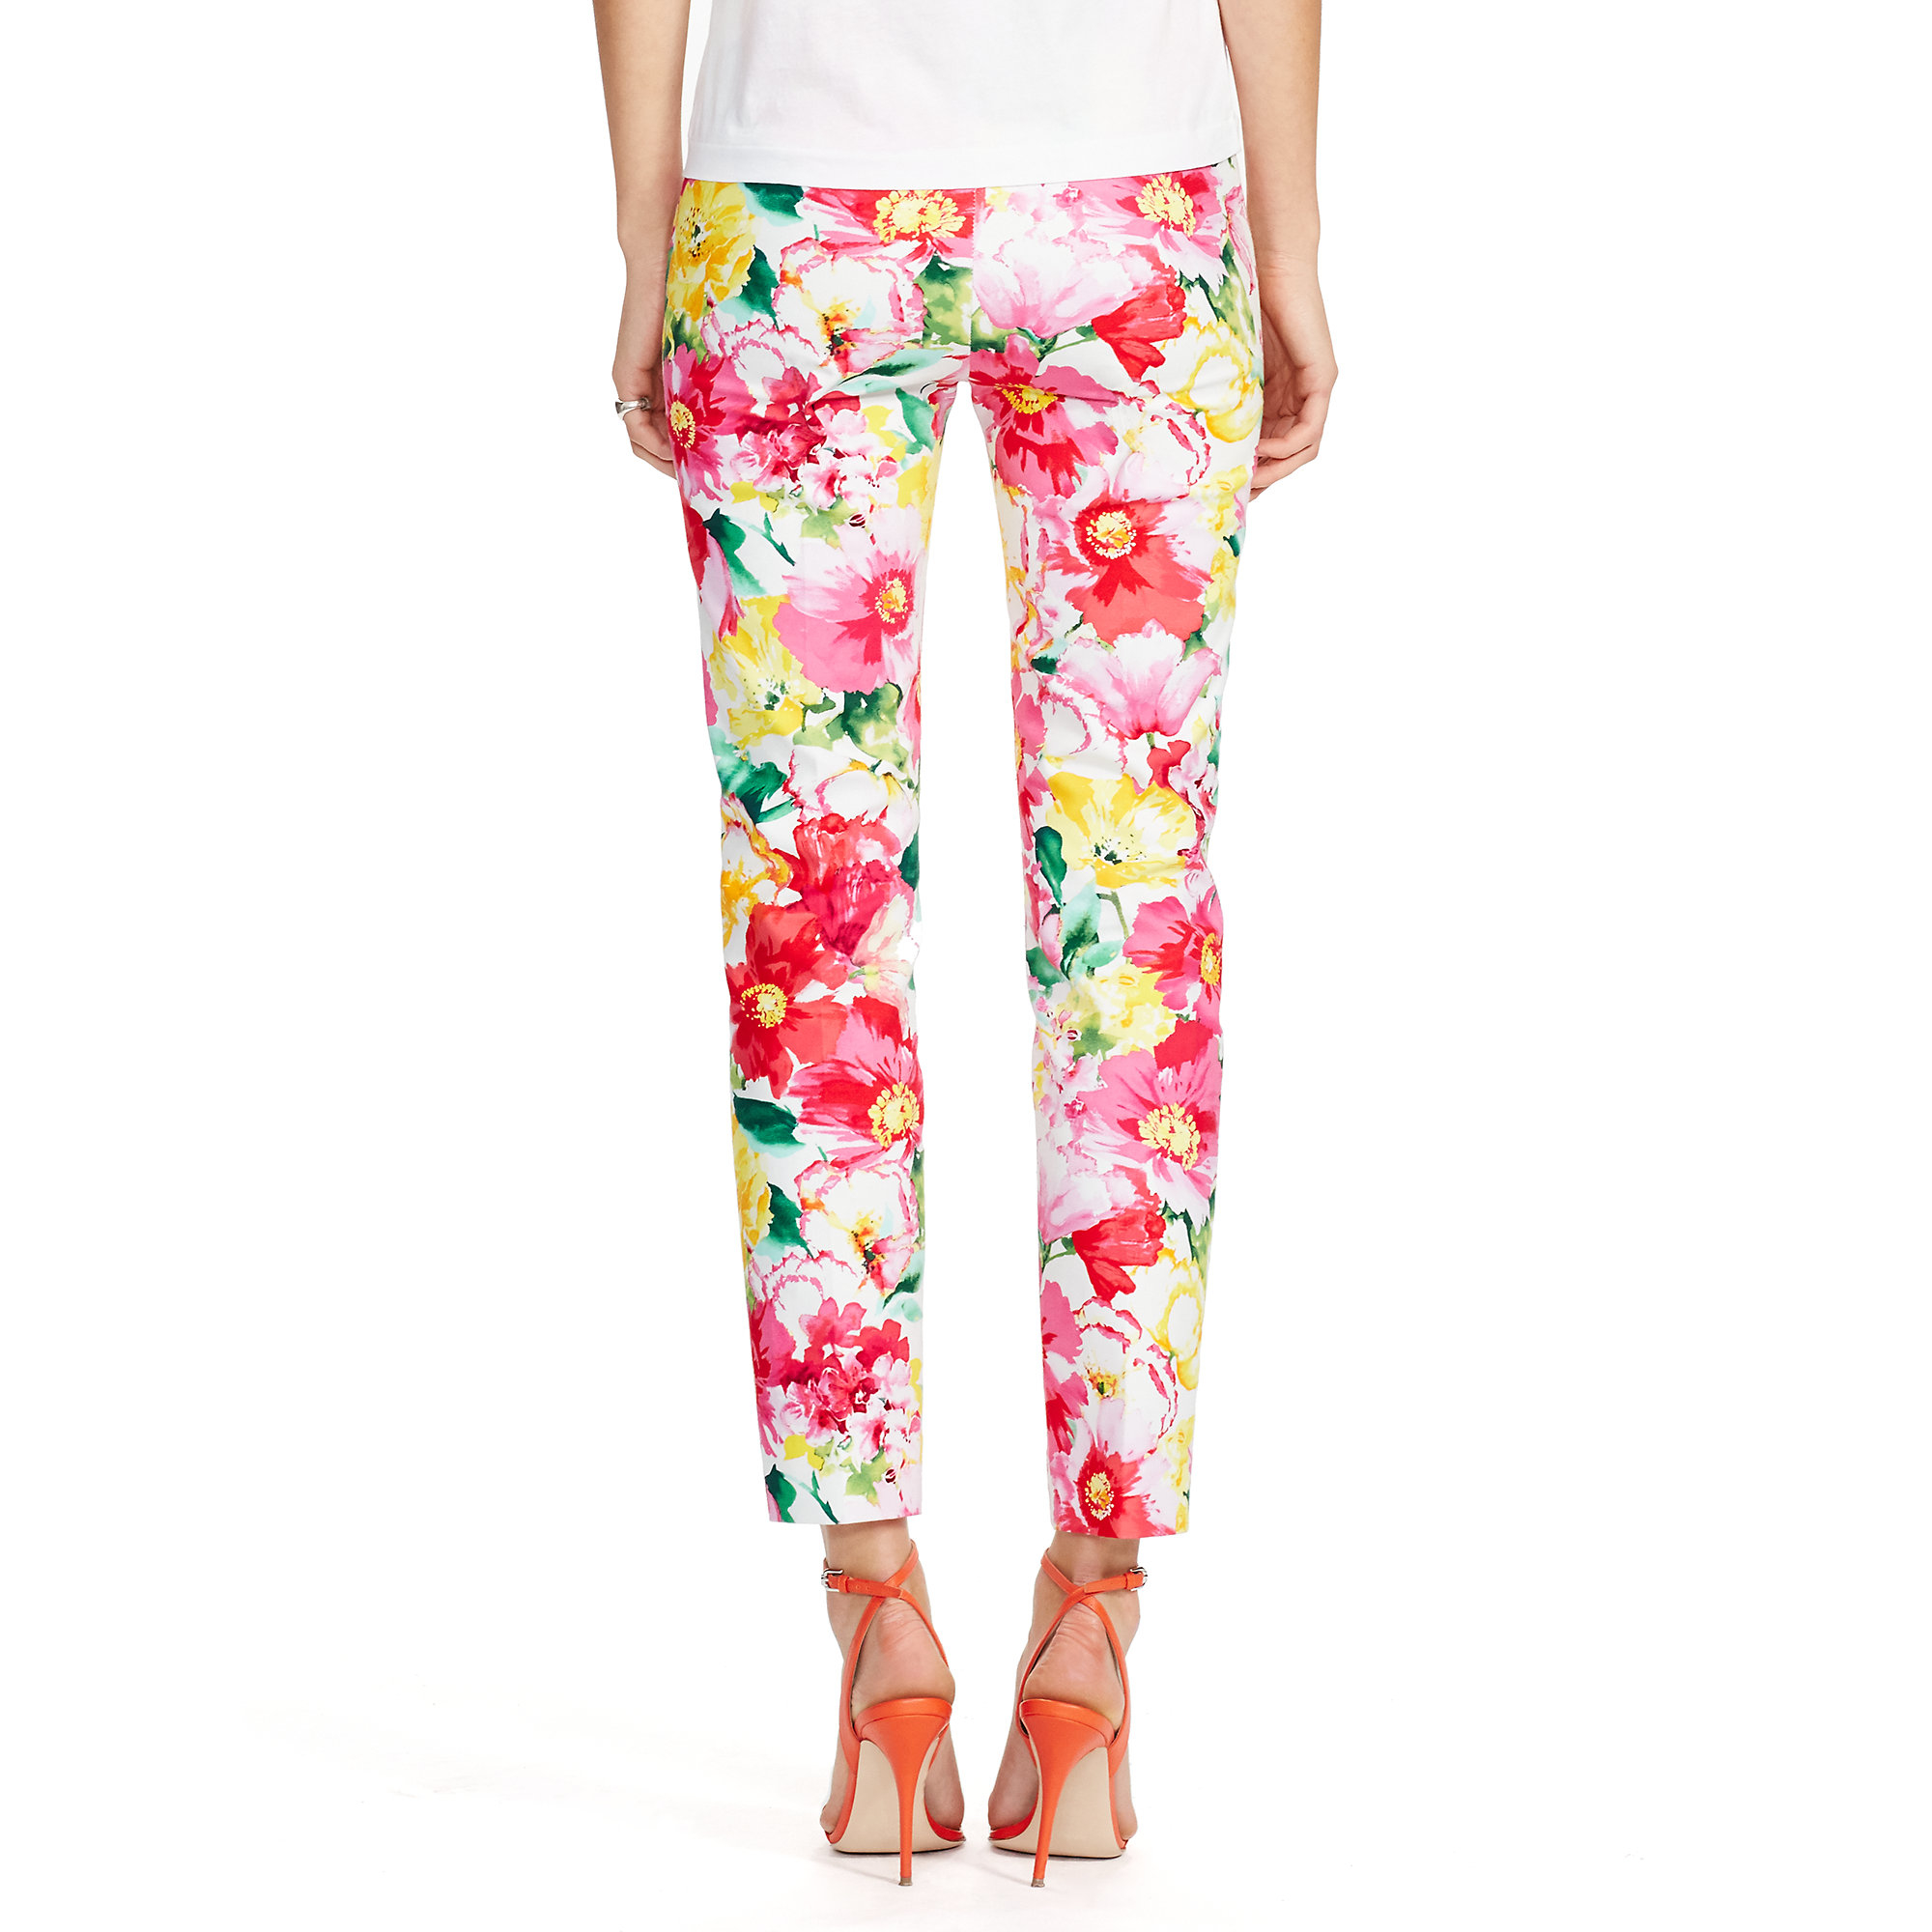 Lyst - Polo Ralph Lauren Floral-print Skinny Pant in Pink